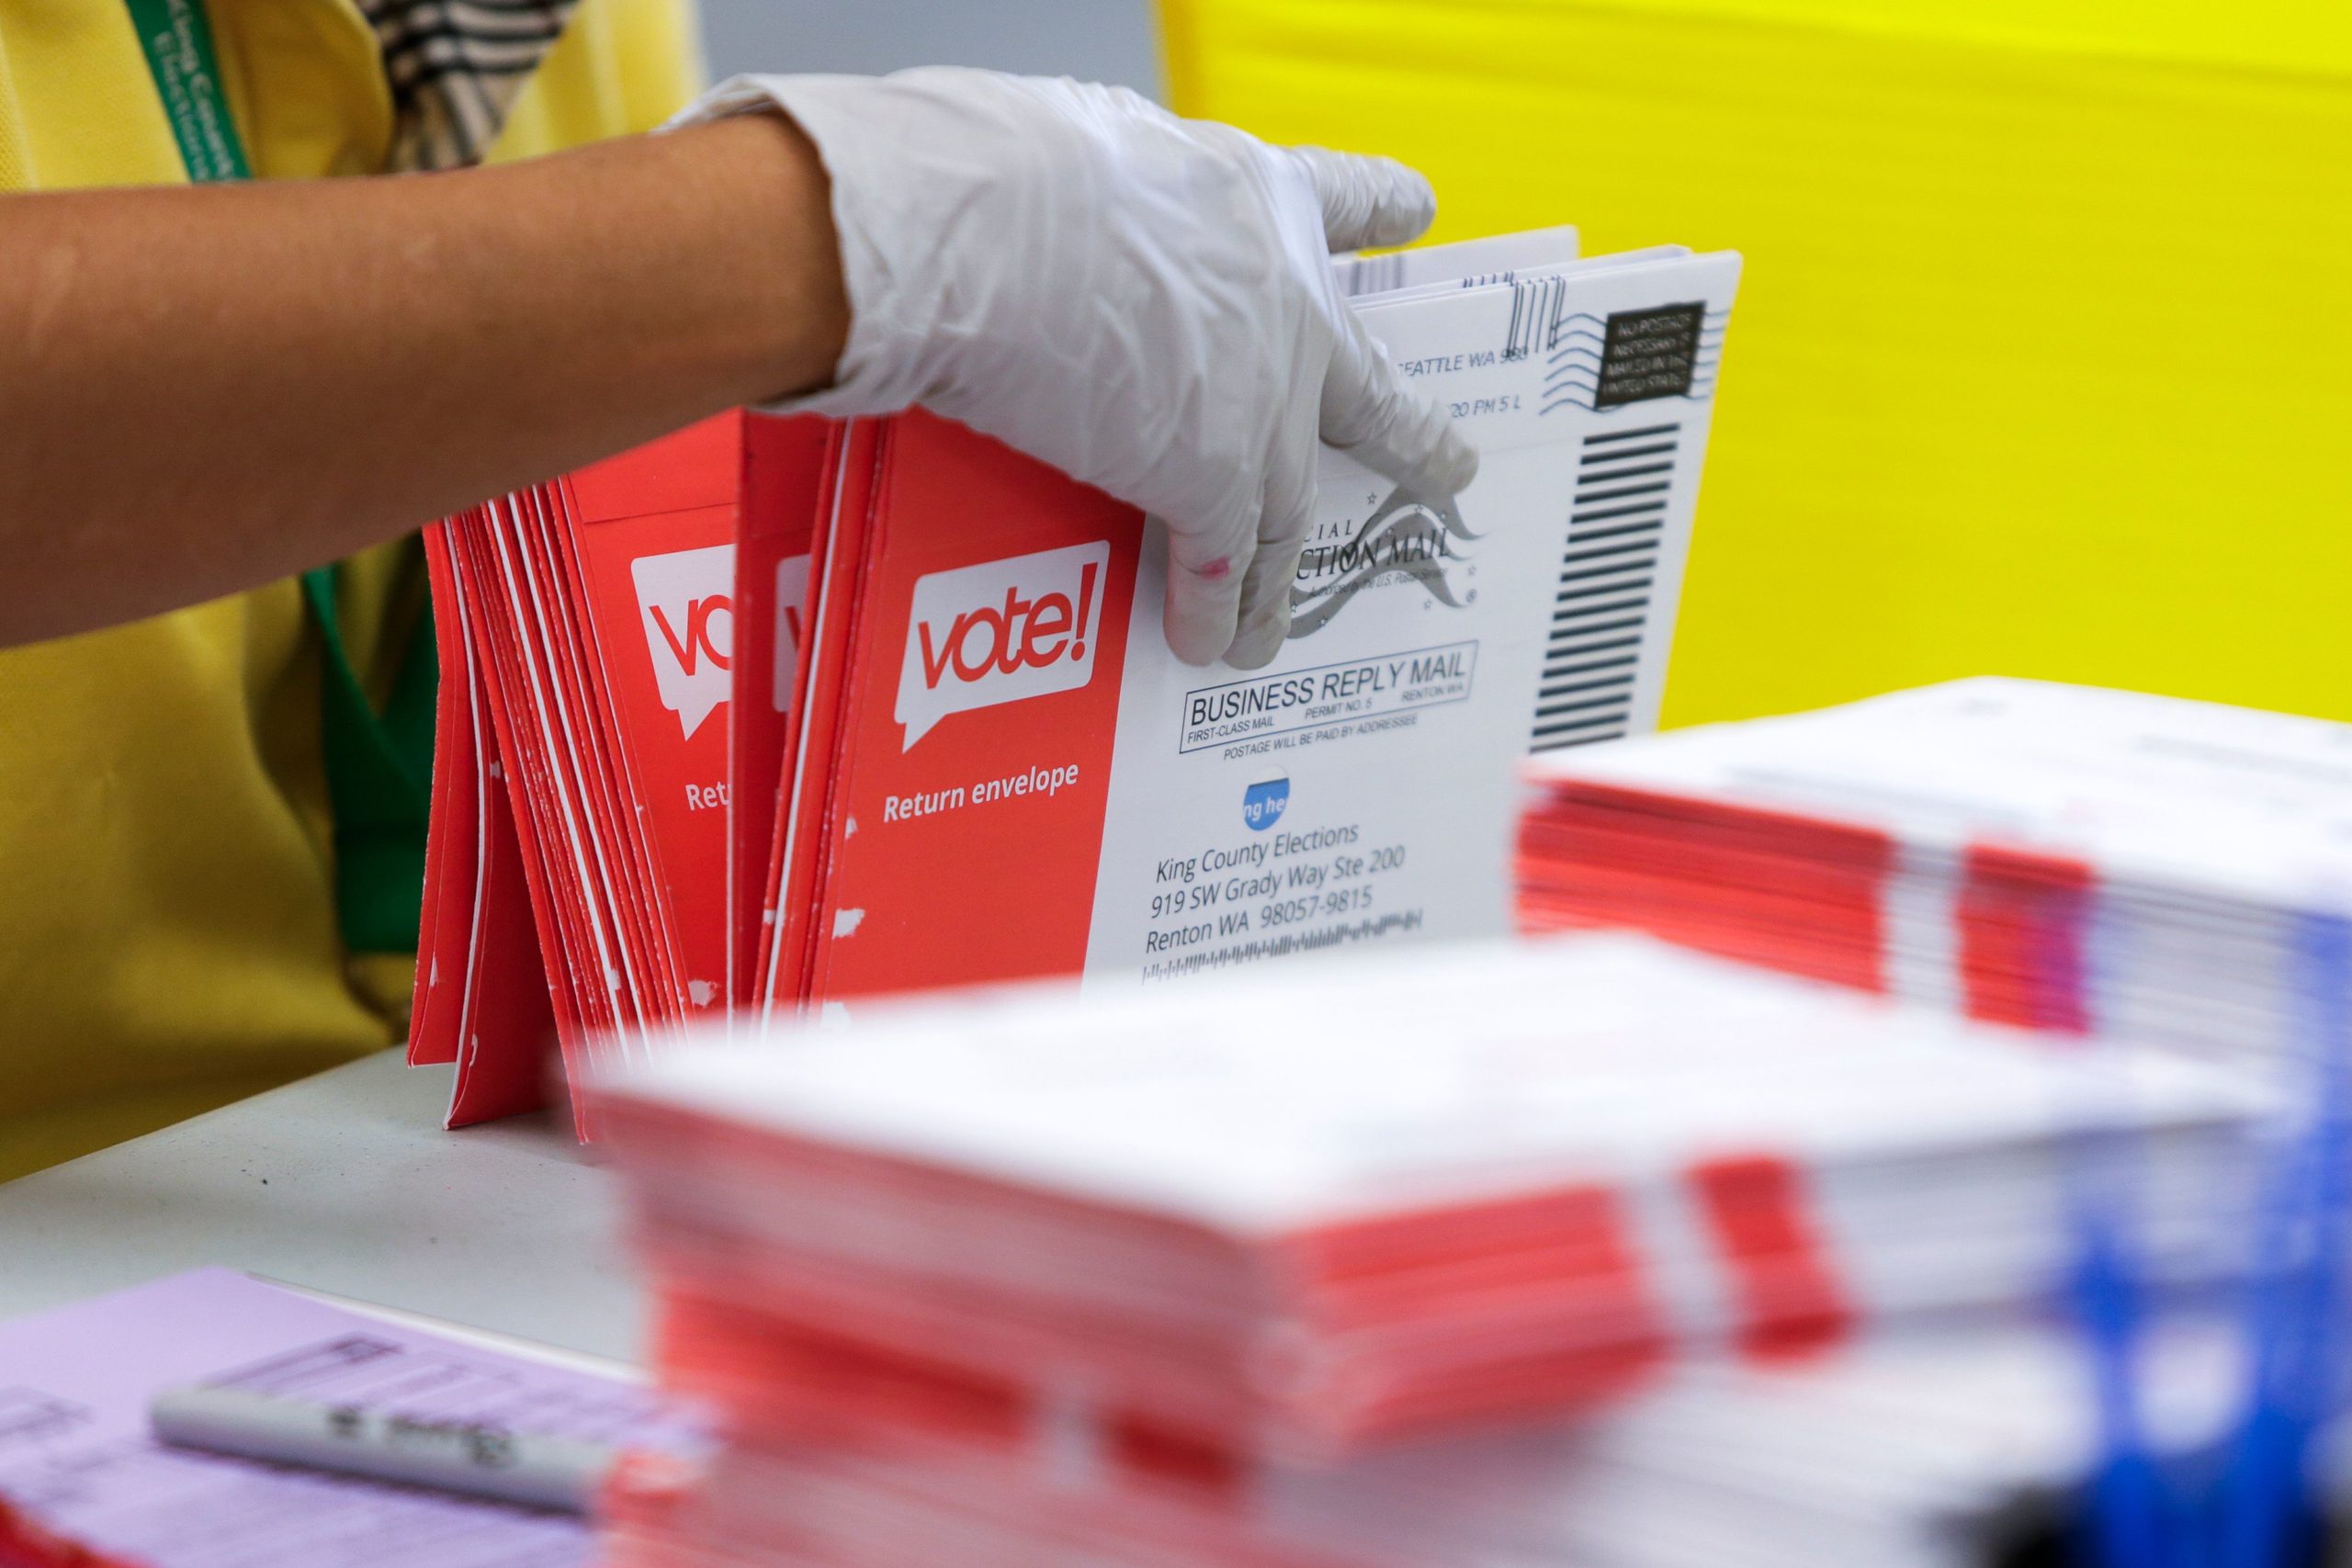 An election worker opens envelopes containing vote-by-mail ballots for the August 4 Washington state primary at King County Elections in Renton, Washington on August 3, 2020. (Photo by Jason Redmond / AFP) (Photo by JASON REDMOND/AFP via Getty Images)